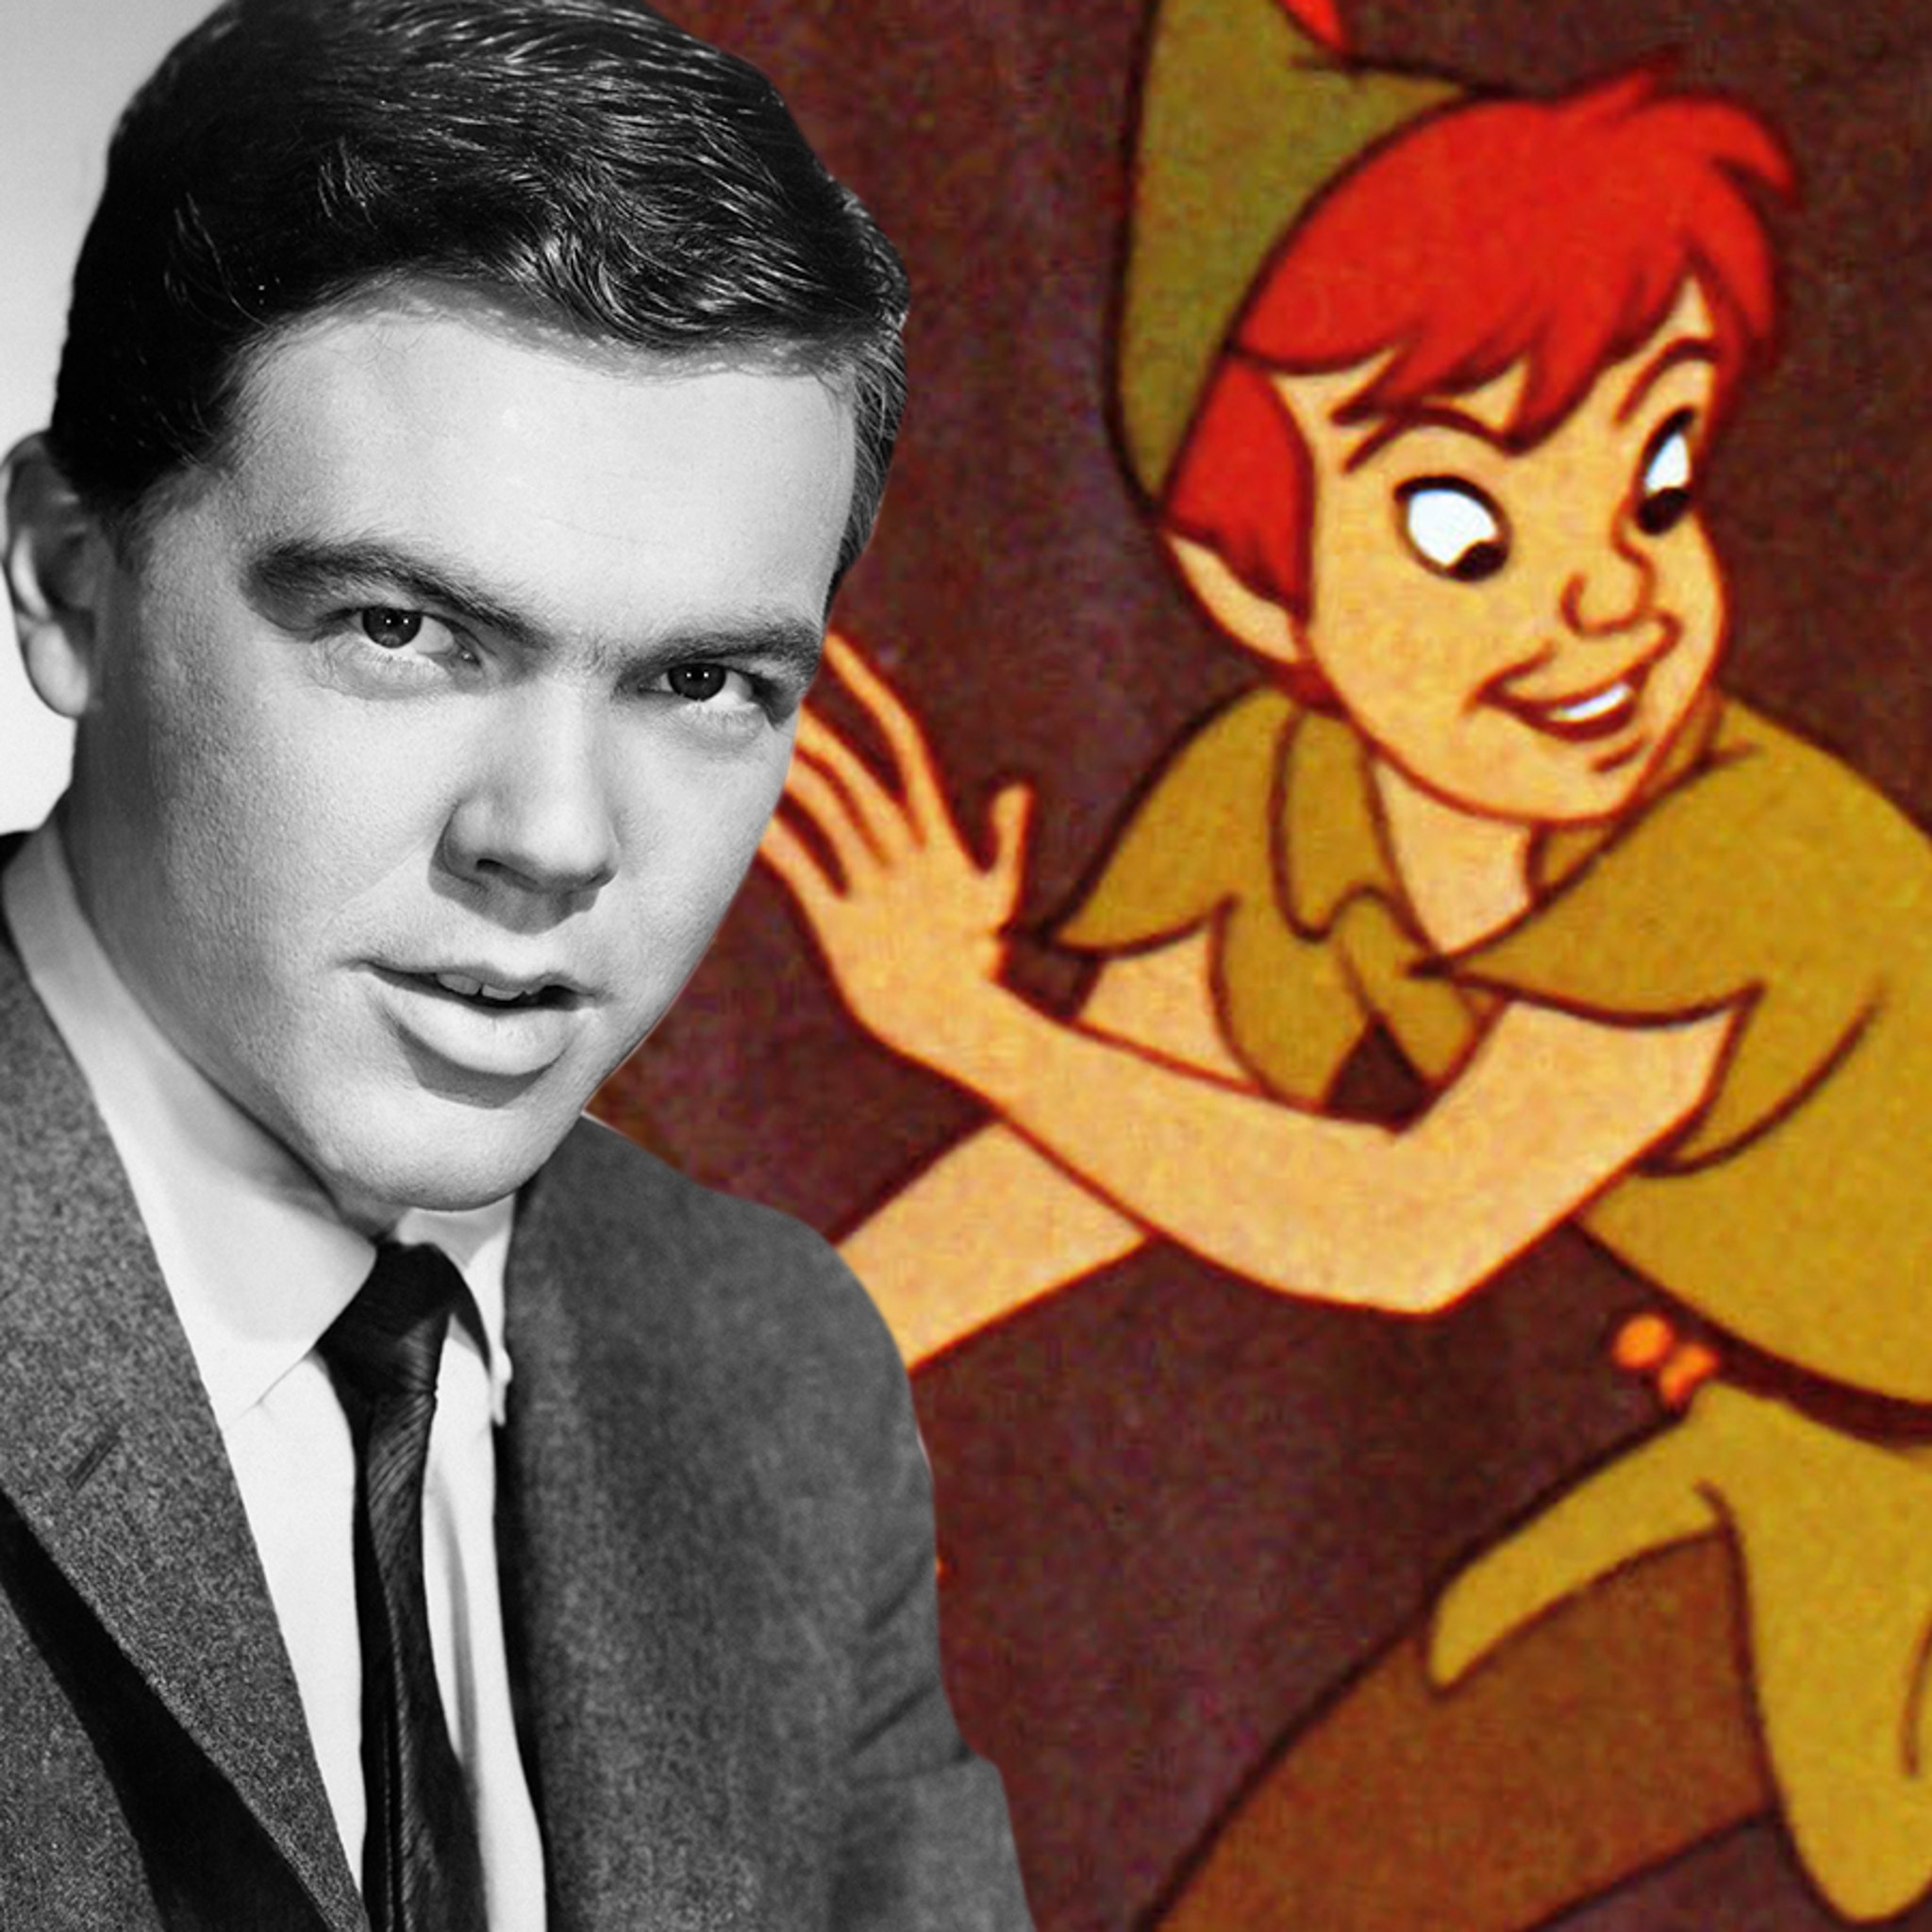 Peter Pan's Arc in 'Rescue Rangers' Compared to Bobby Driscoll Tragedy